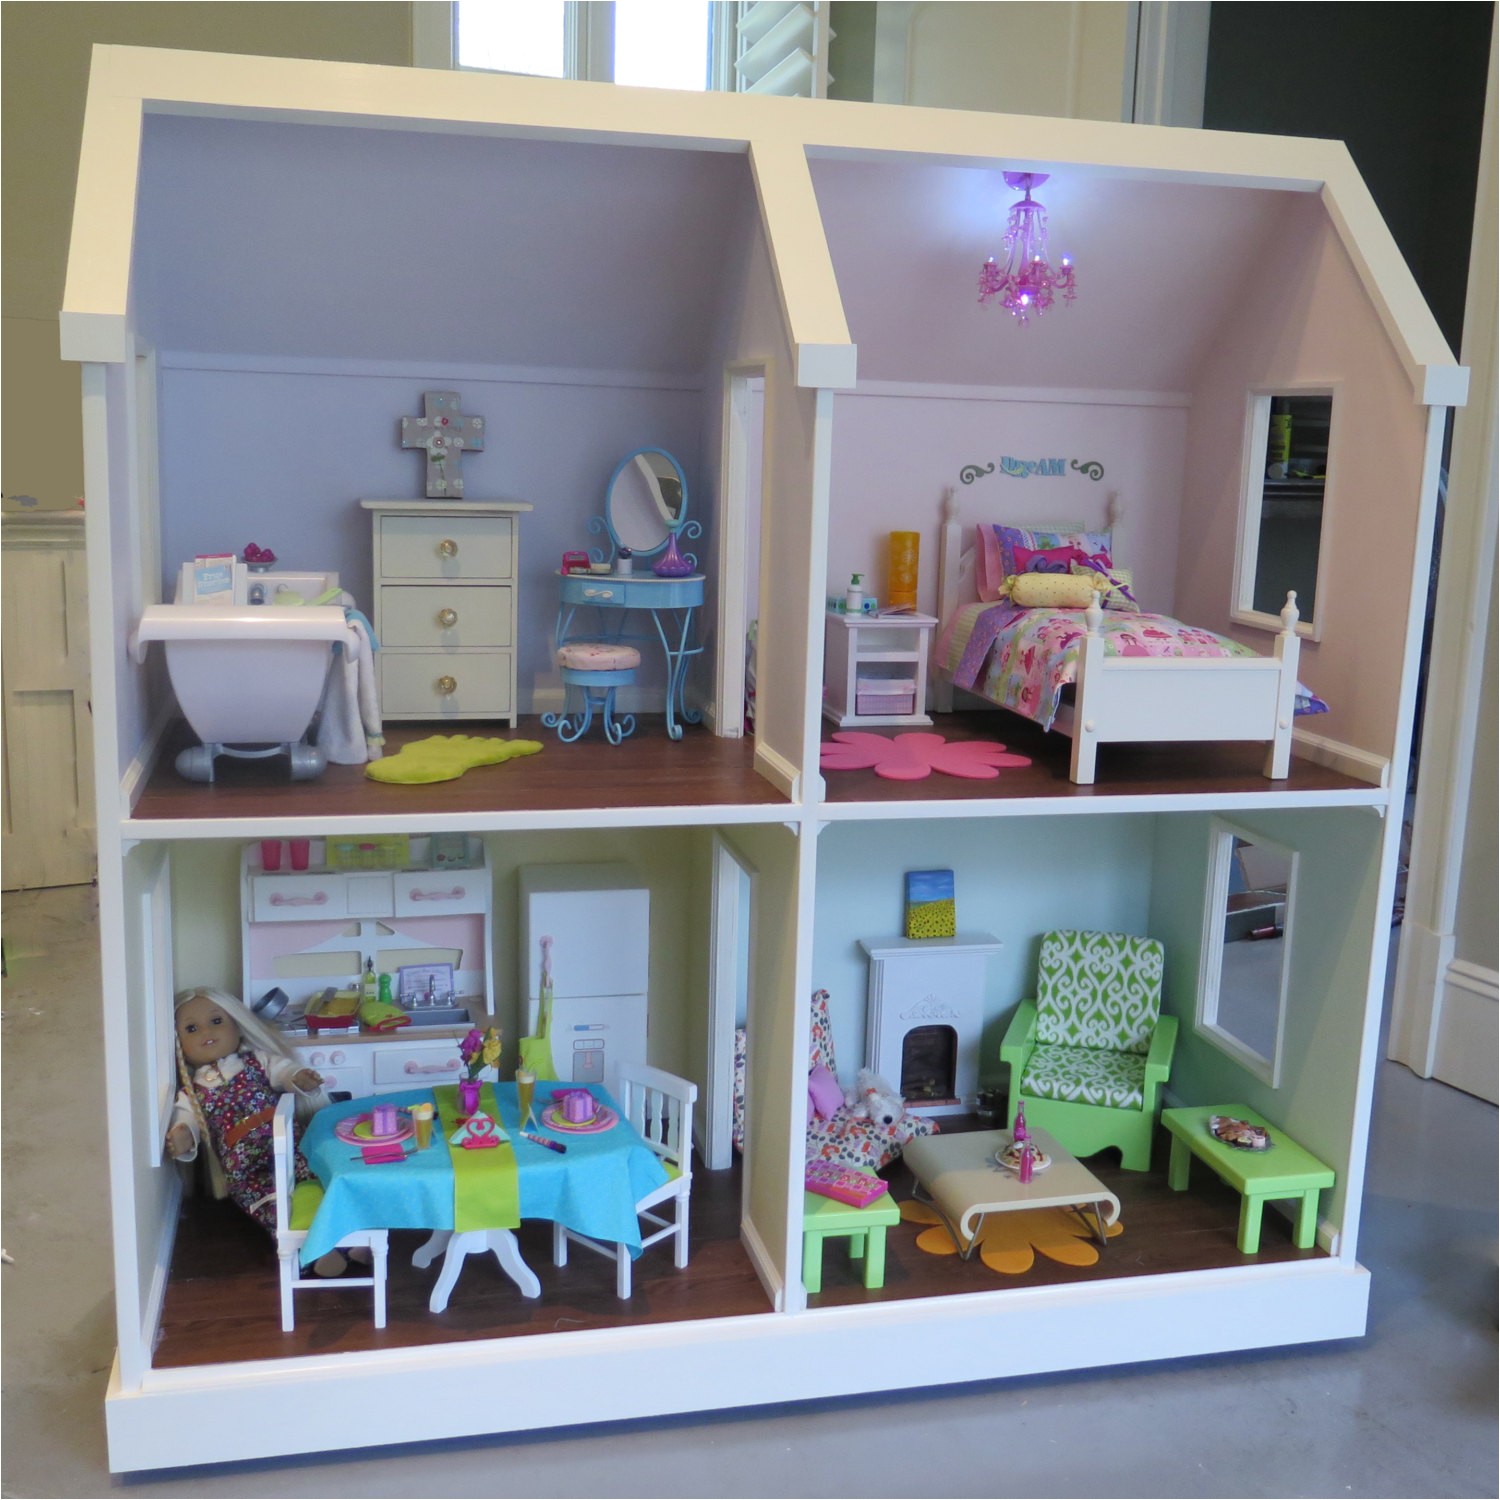 American Doll House Plans Doll House Plans for American Girl or 18 Inch Dolls 4 Room